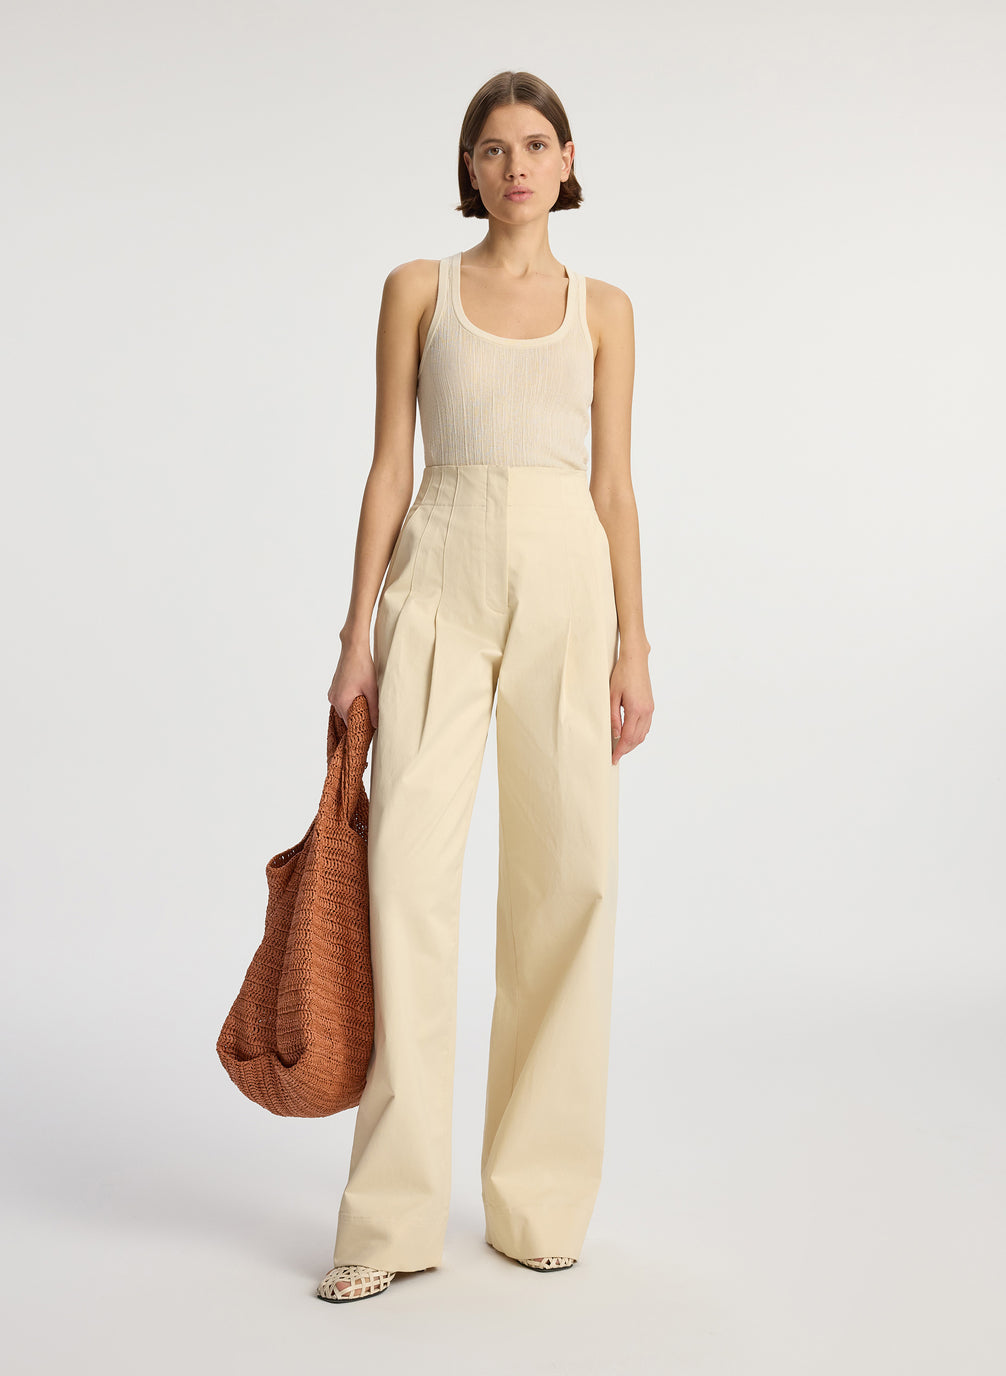 front view of woman wearing cream tank top and beige sateen wide leg pants